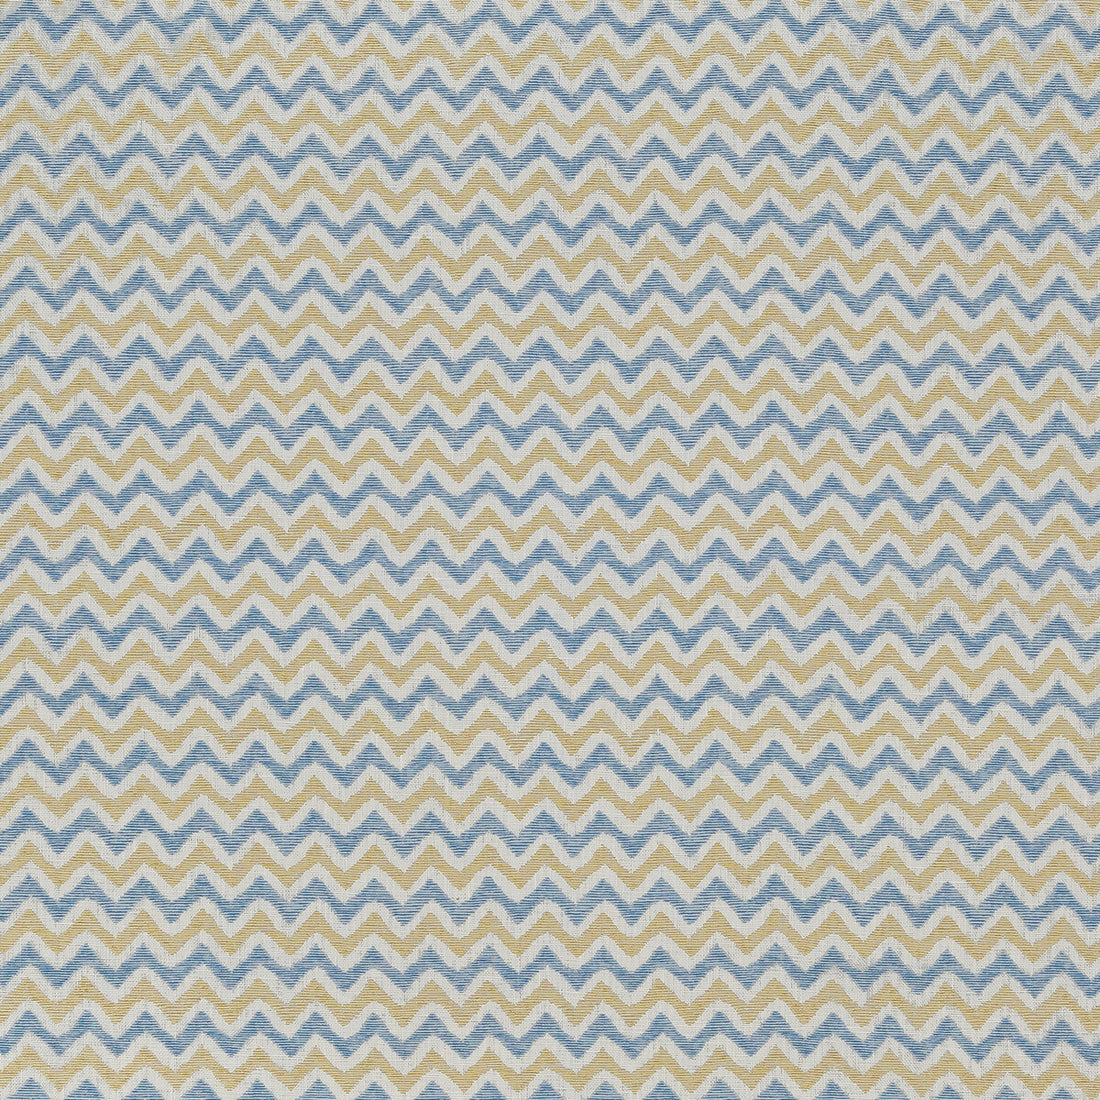 Baby Colebrook fabric in blue/yellow color - pattern BFC-3698.514.0 - by Lee Jofa in the Blithfield collection